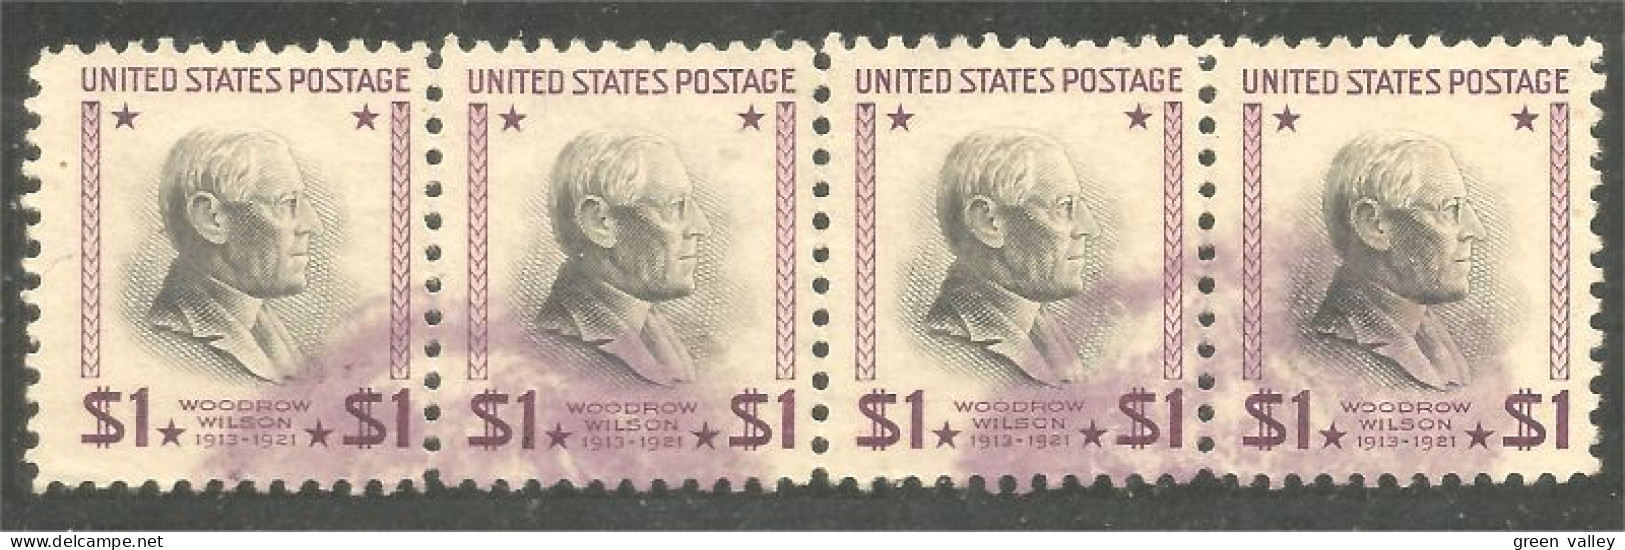 912 USA $1 Woodrow Wilson Dollar Strip Of 4 Stamps (USA-468) - Used Stamps